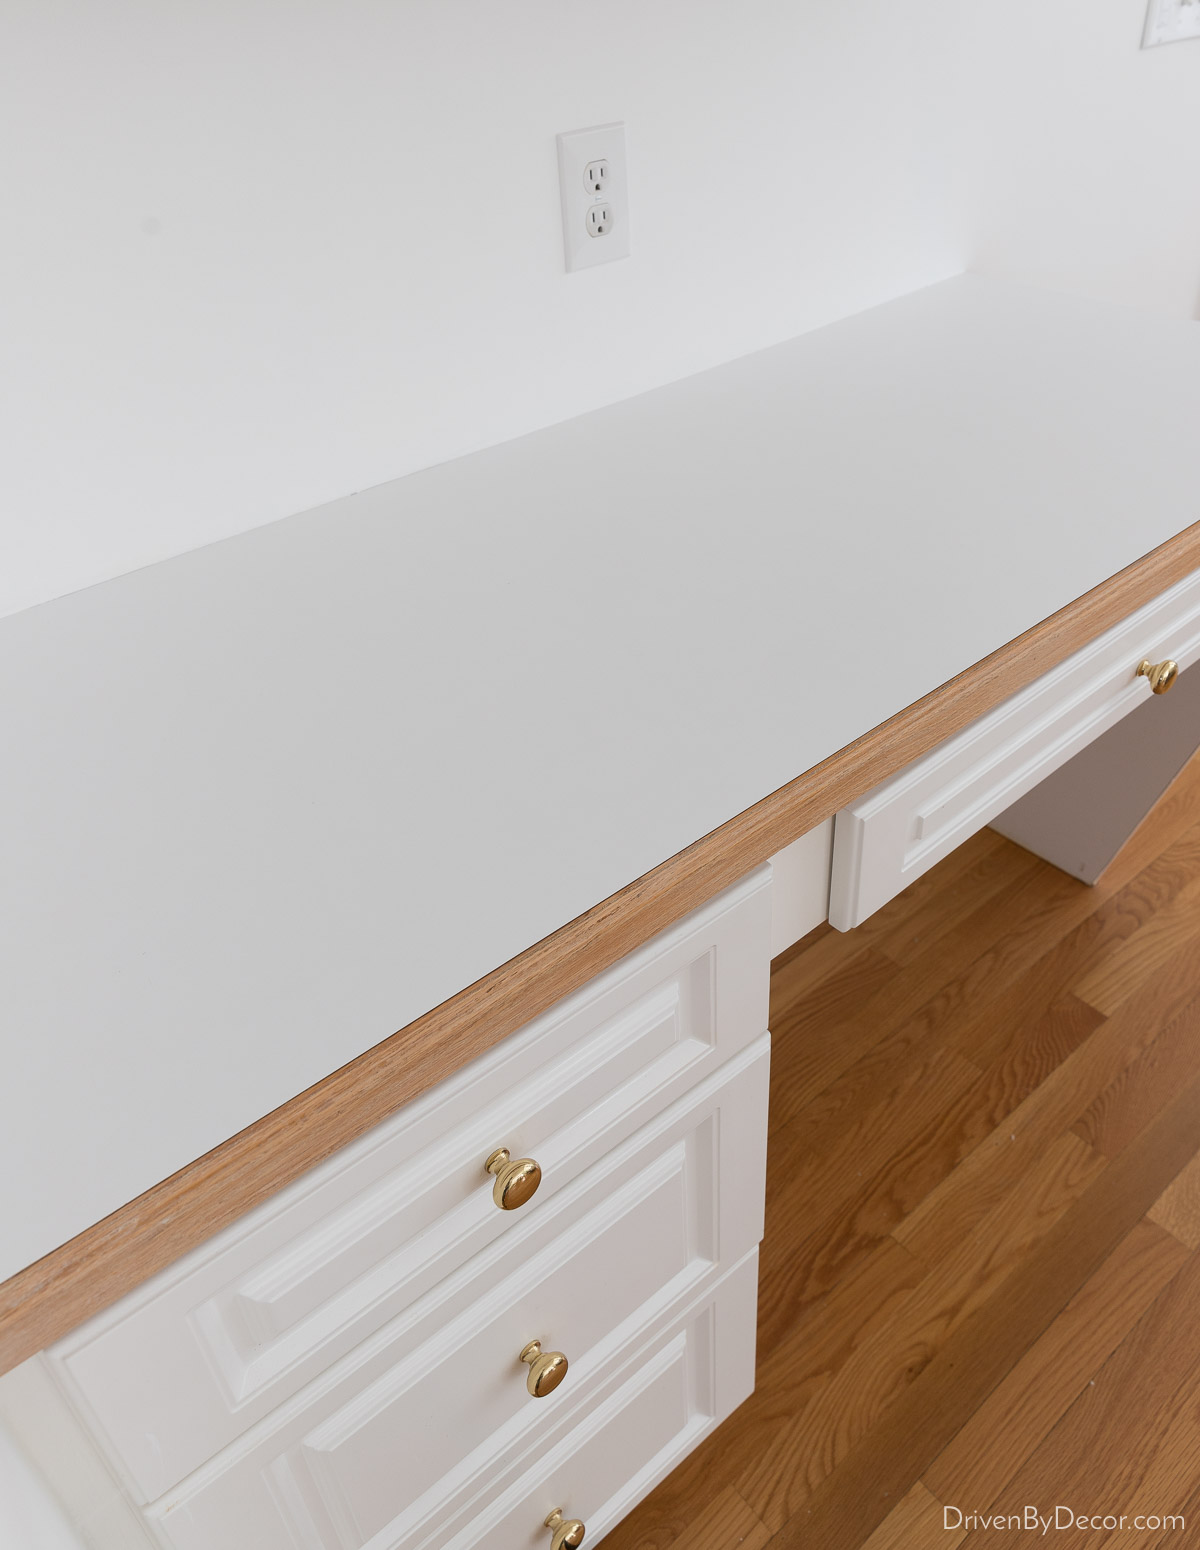 The white laminate countertops I covered with marble contact paper